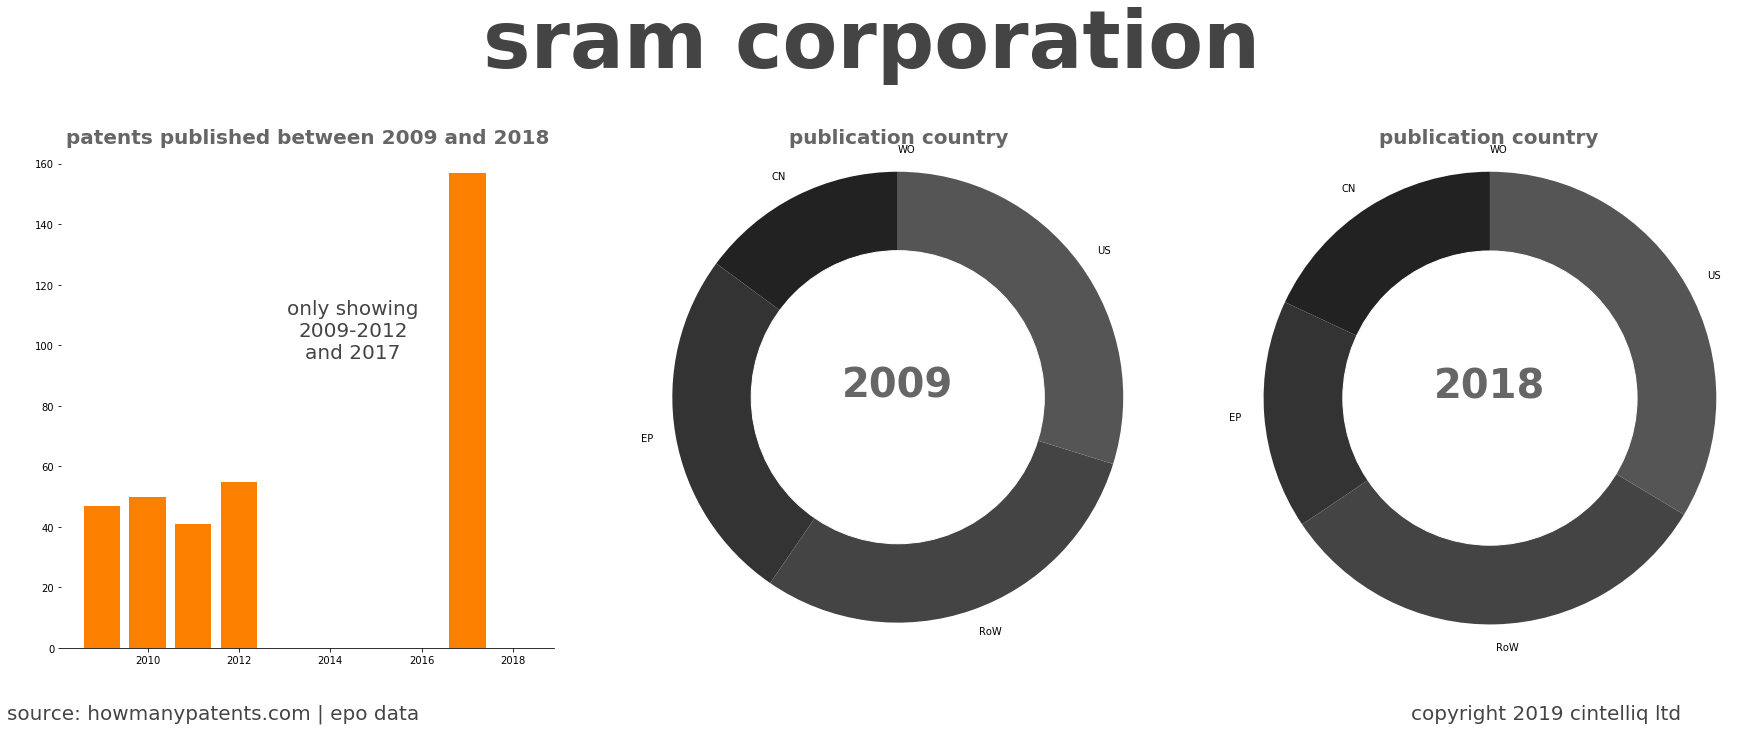 summary of patents for Sram Corporation